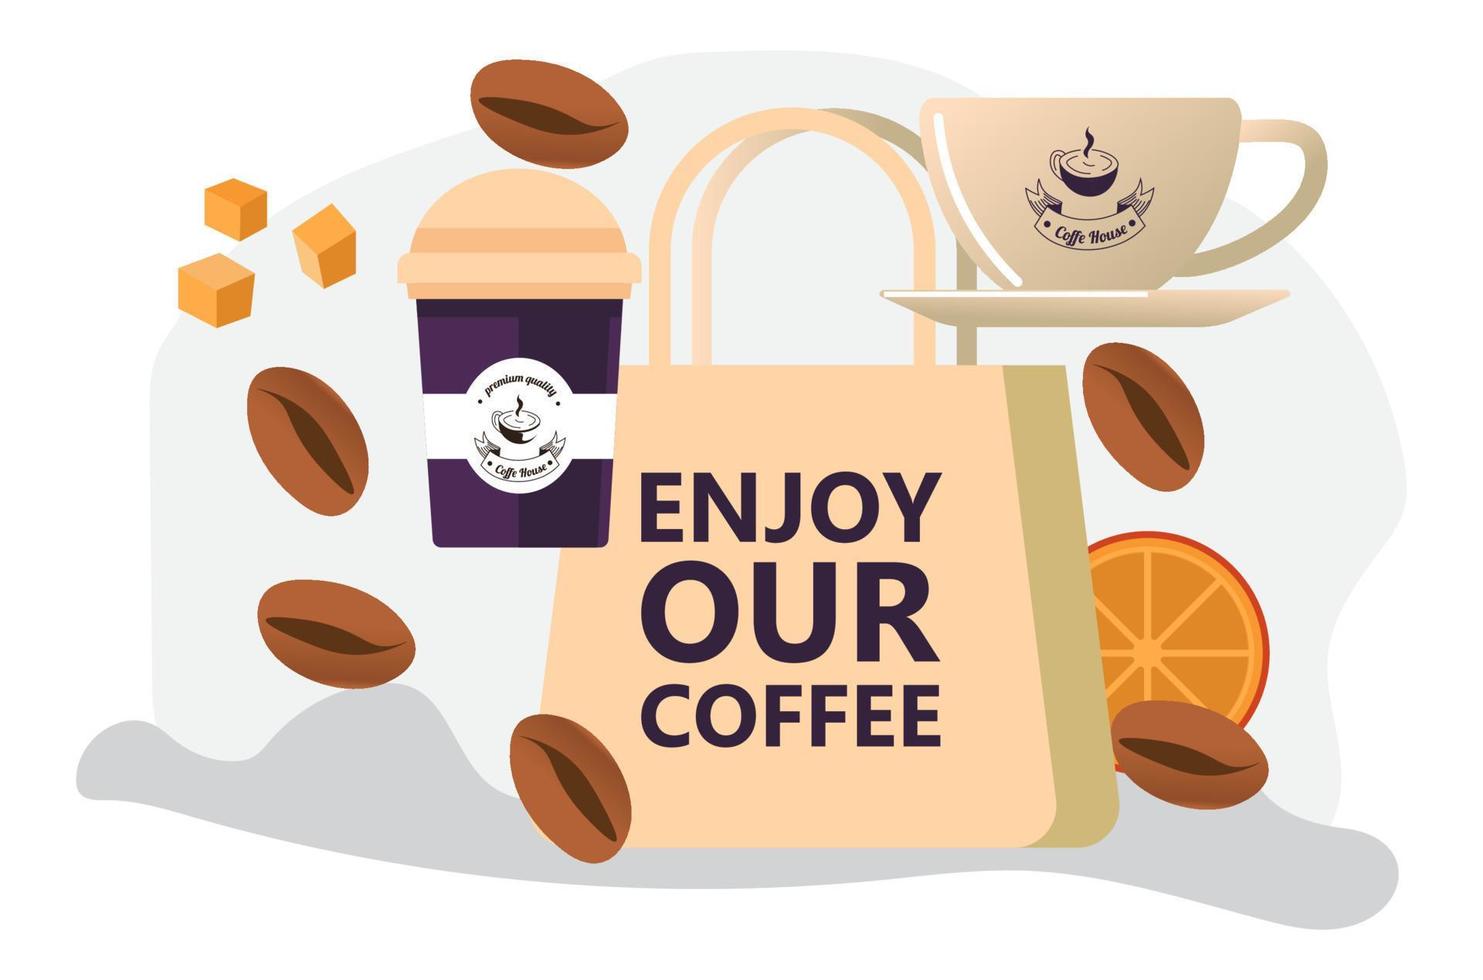 Enjoy our coffee, shop or house with beverages vector